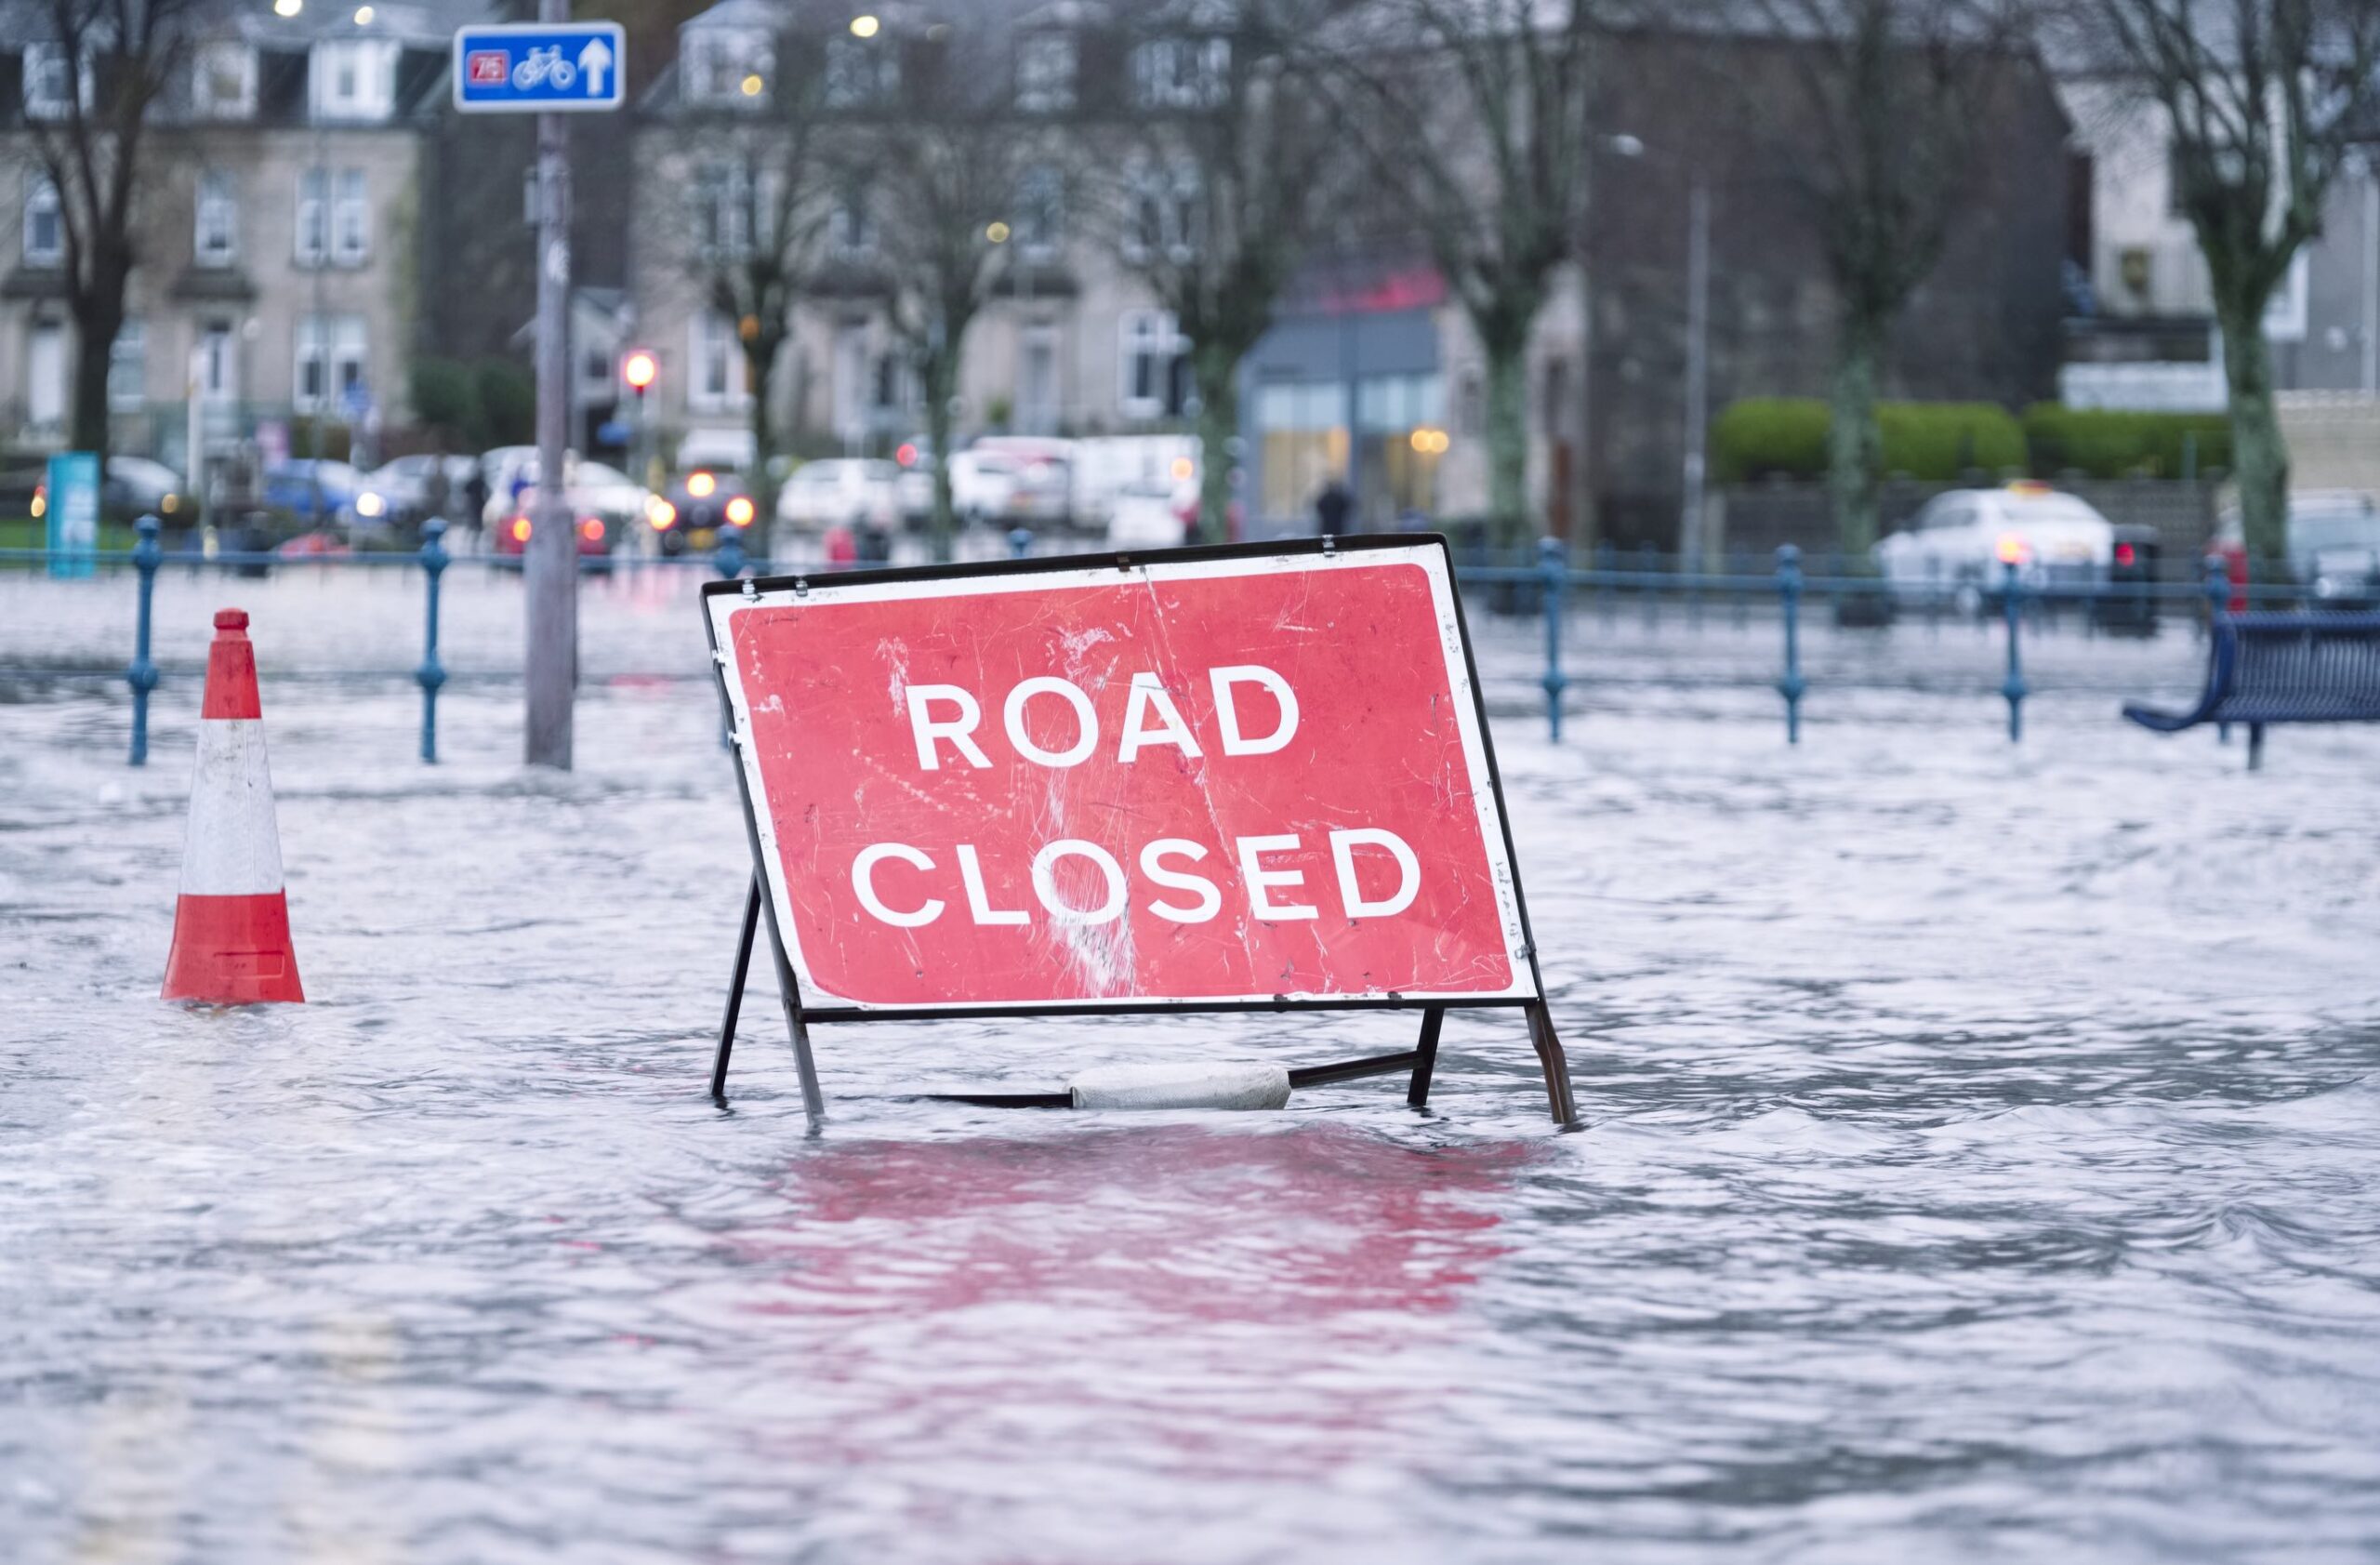 A "Road Closed" sign in the middle of a flooded street.